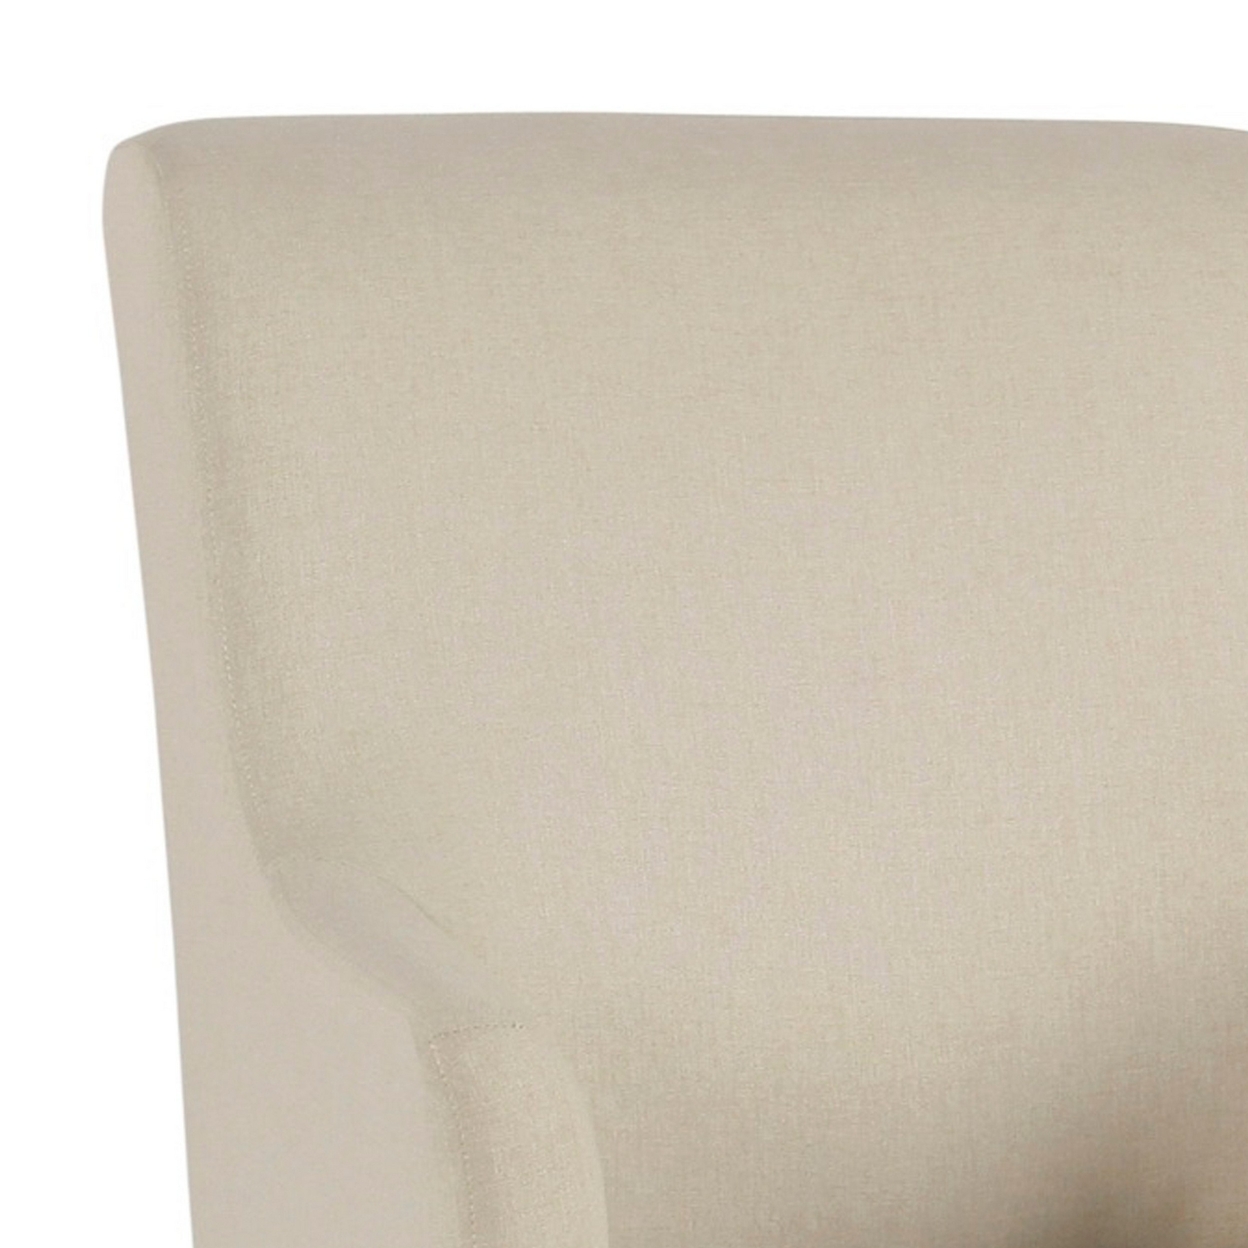 Fabric Upholstered Wooden Accent Chair With Low Swoop Armrests, Cream- Saltoro Sherpi